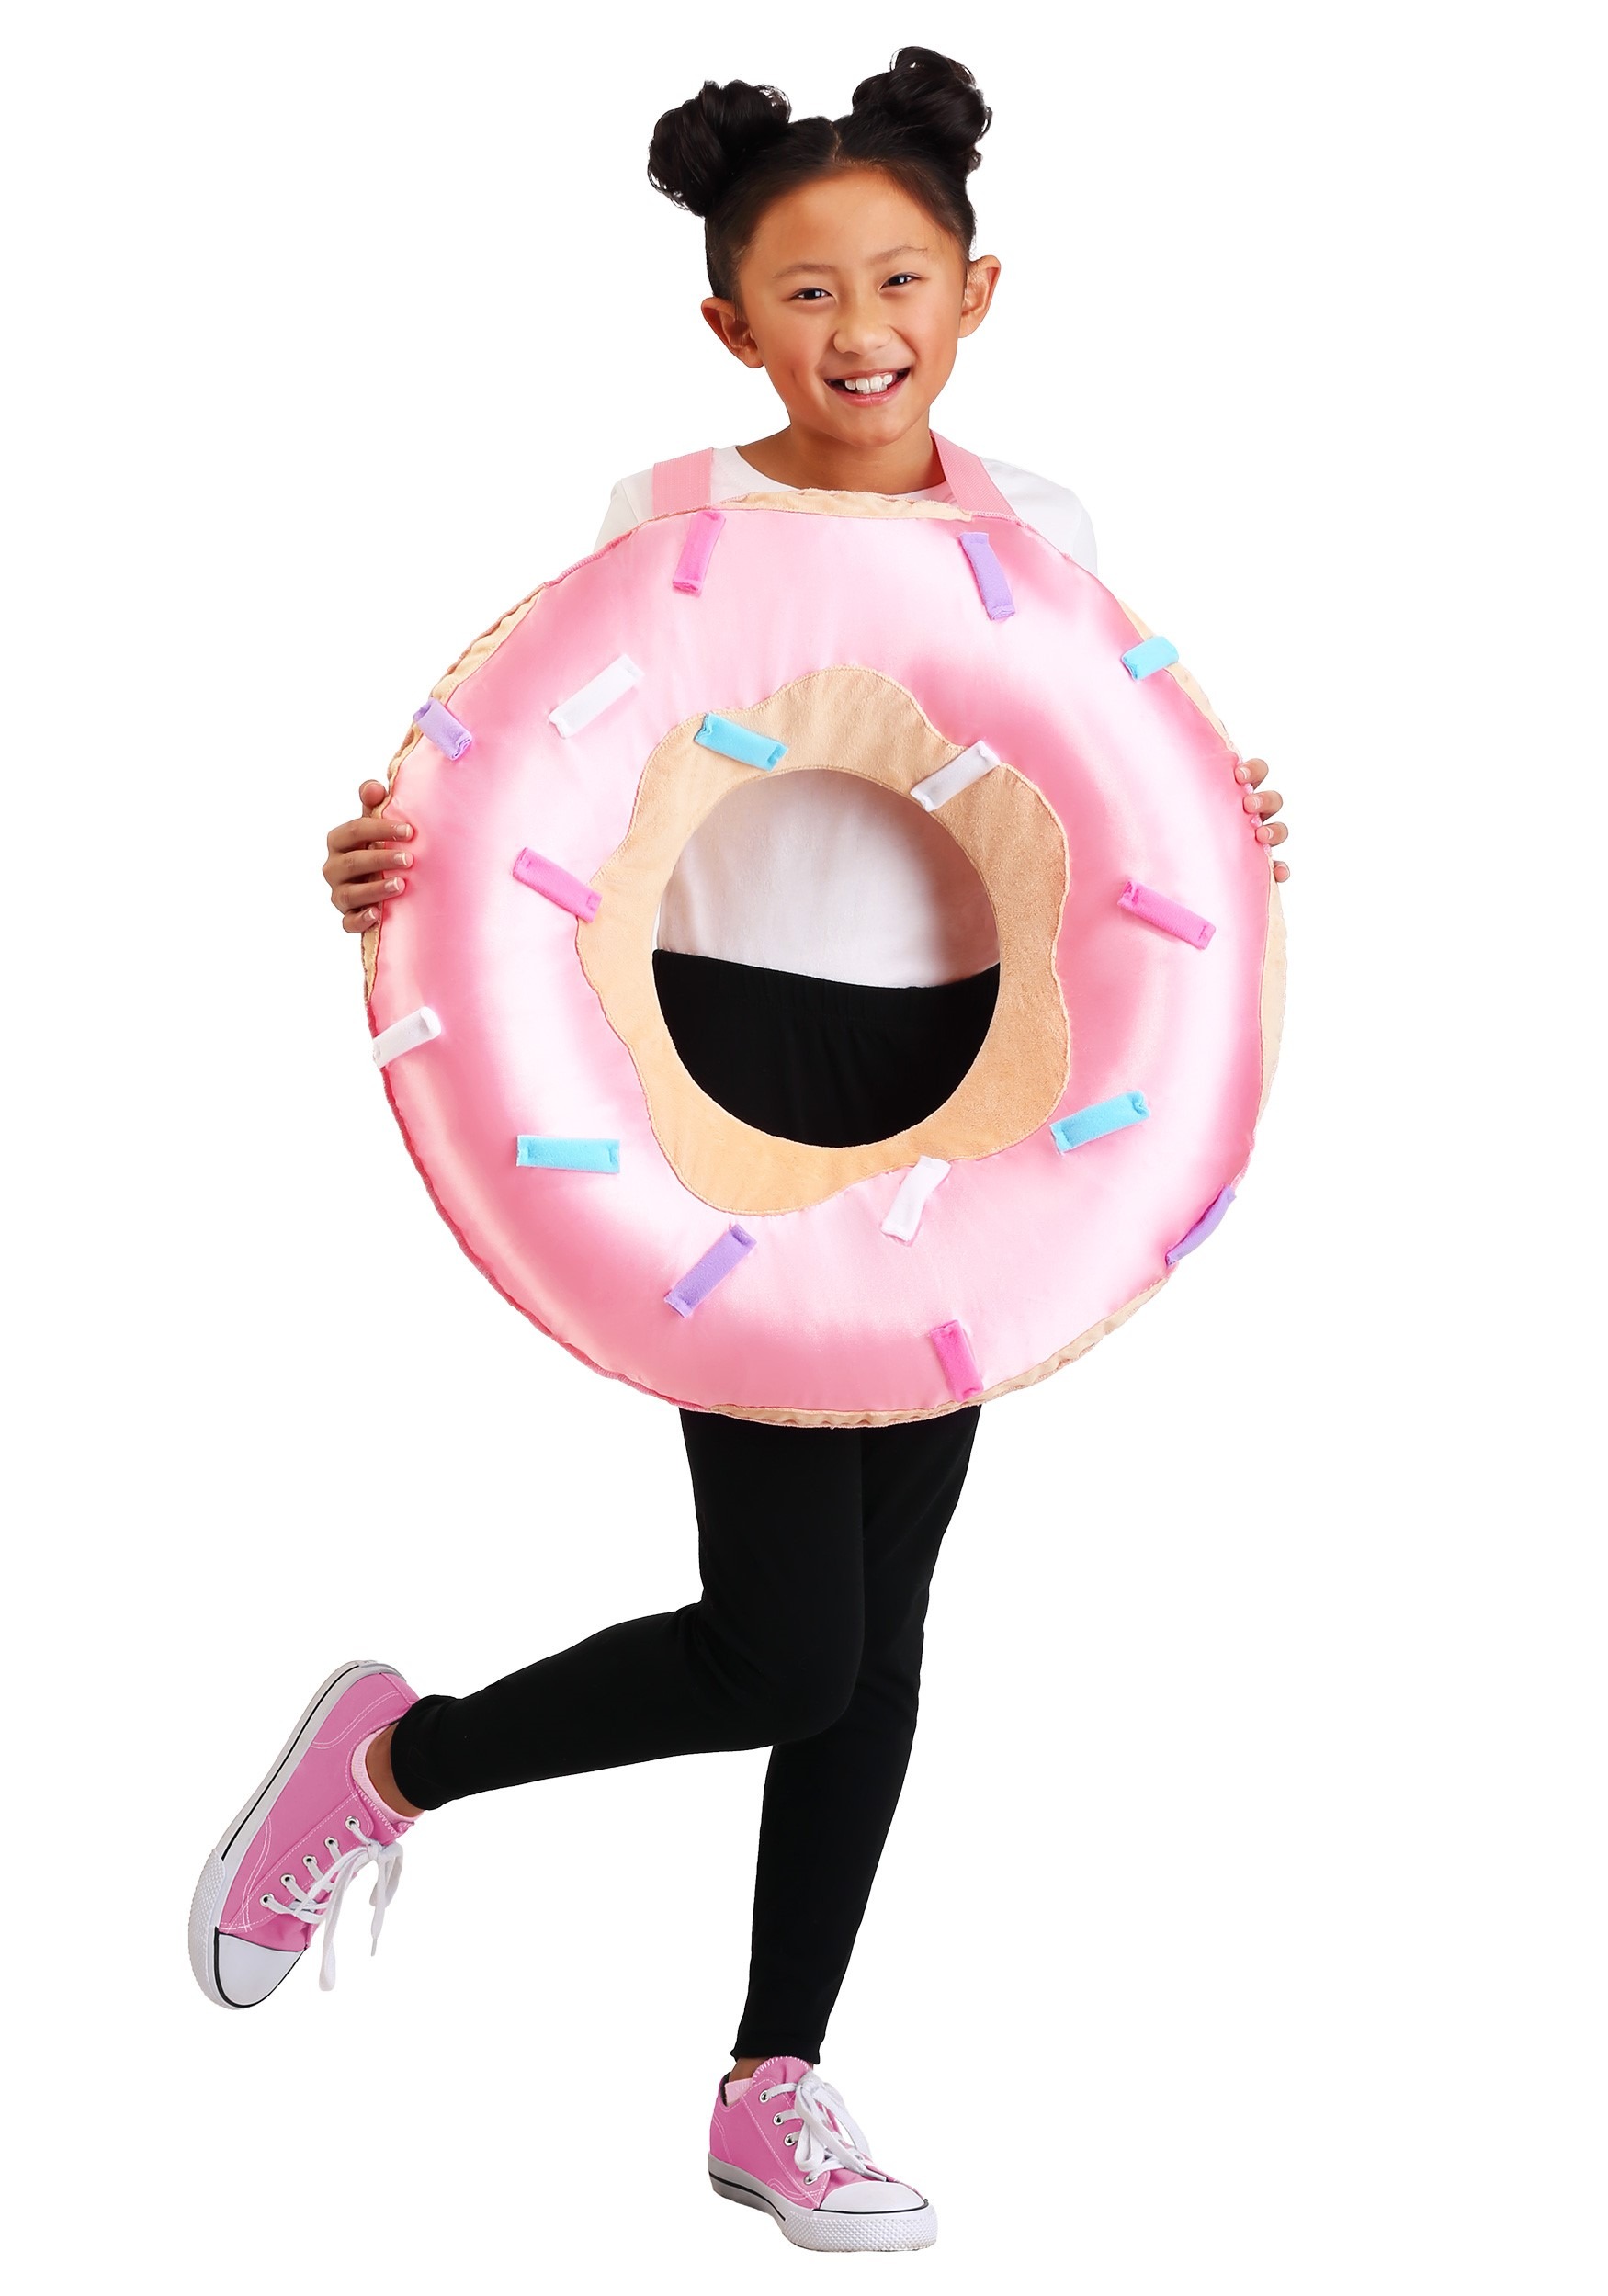 Photos - Fancy Dress FUN Costumes Exclusive Child Donut Costume Brown/Pink FUN7153CH